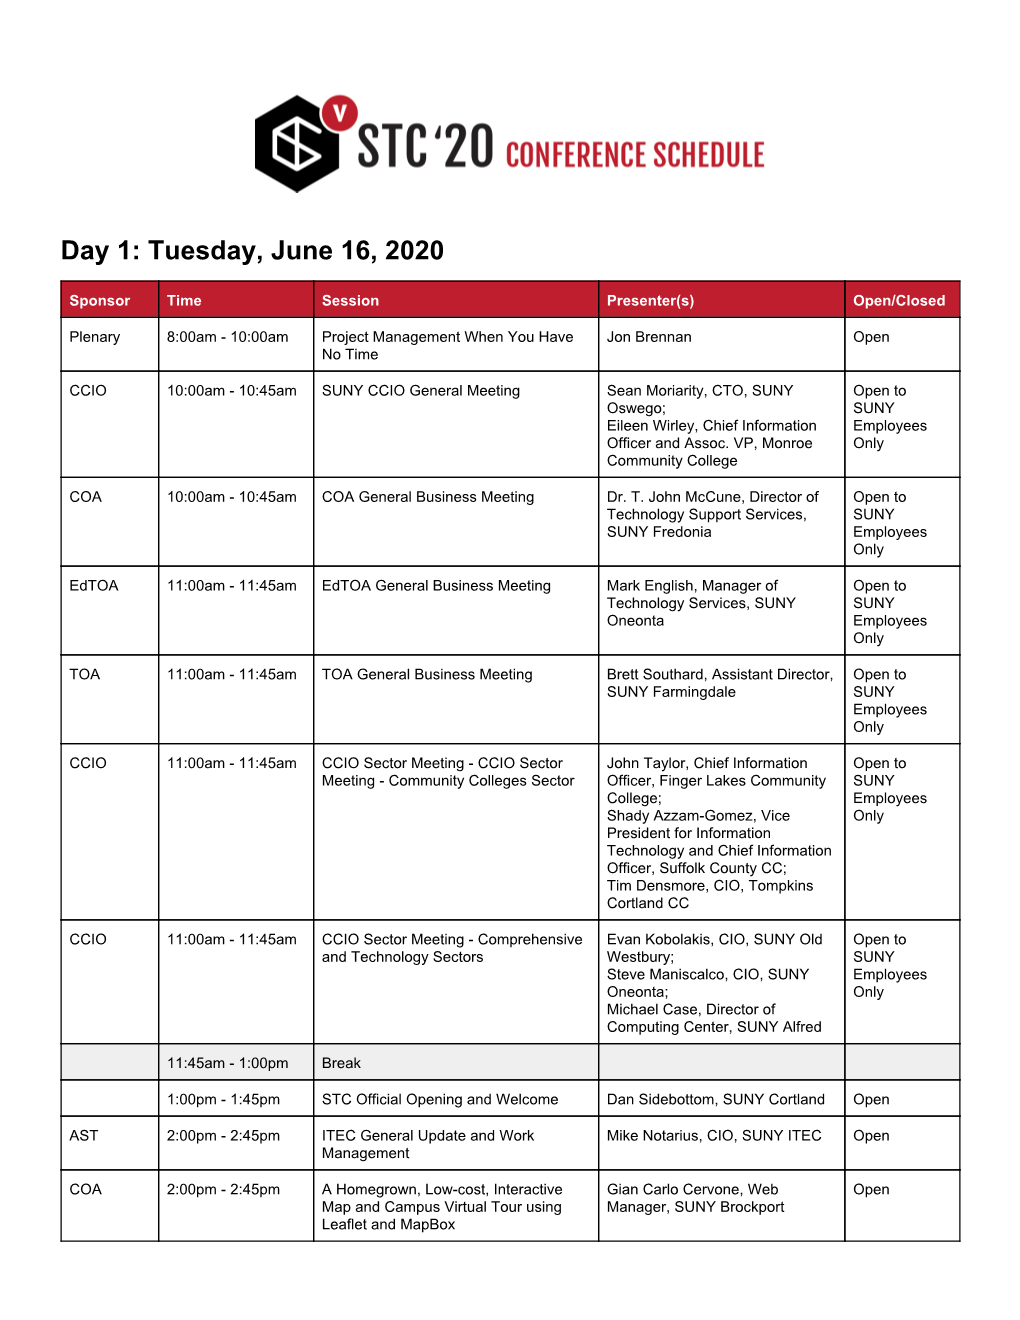 Download the Full STC 2020 Schedule (Pdf)